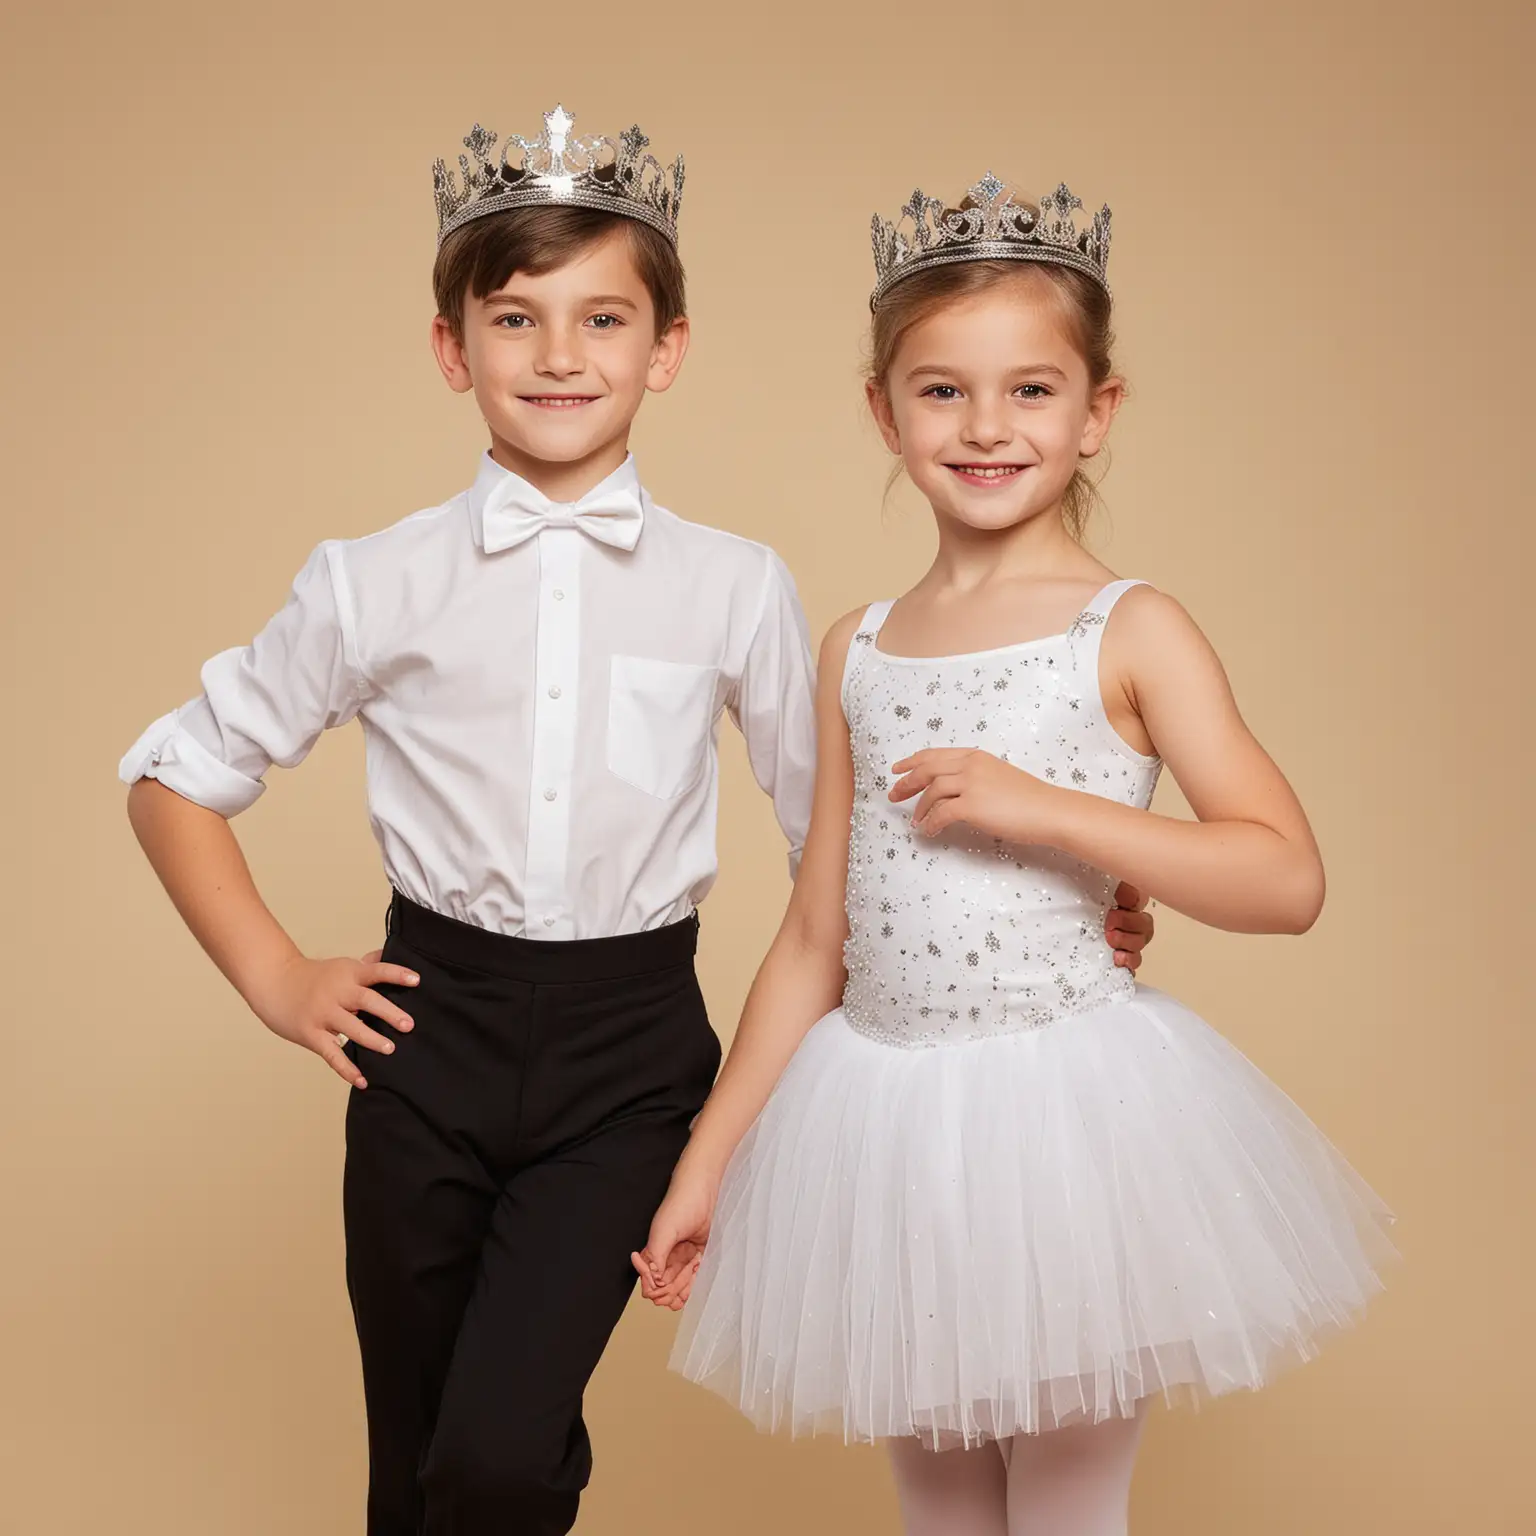 one girl, aged 5, in ballet attire with a tiara on. one boy, same age, dressed in a white shirt and black pants, with a crown on. tap dance. camp. fun and happy. close up. looking at the camera. whimsical. solid background.
